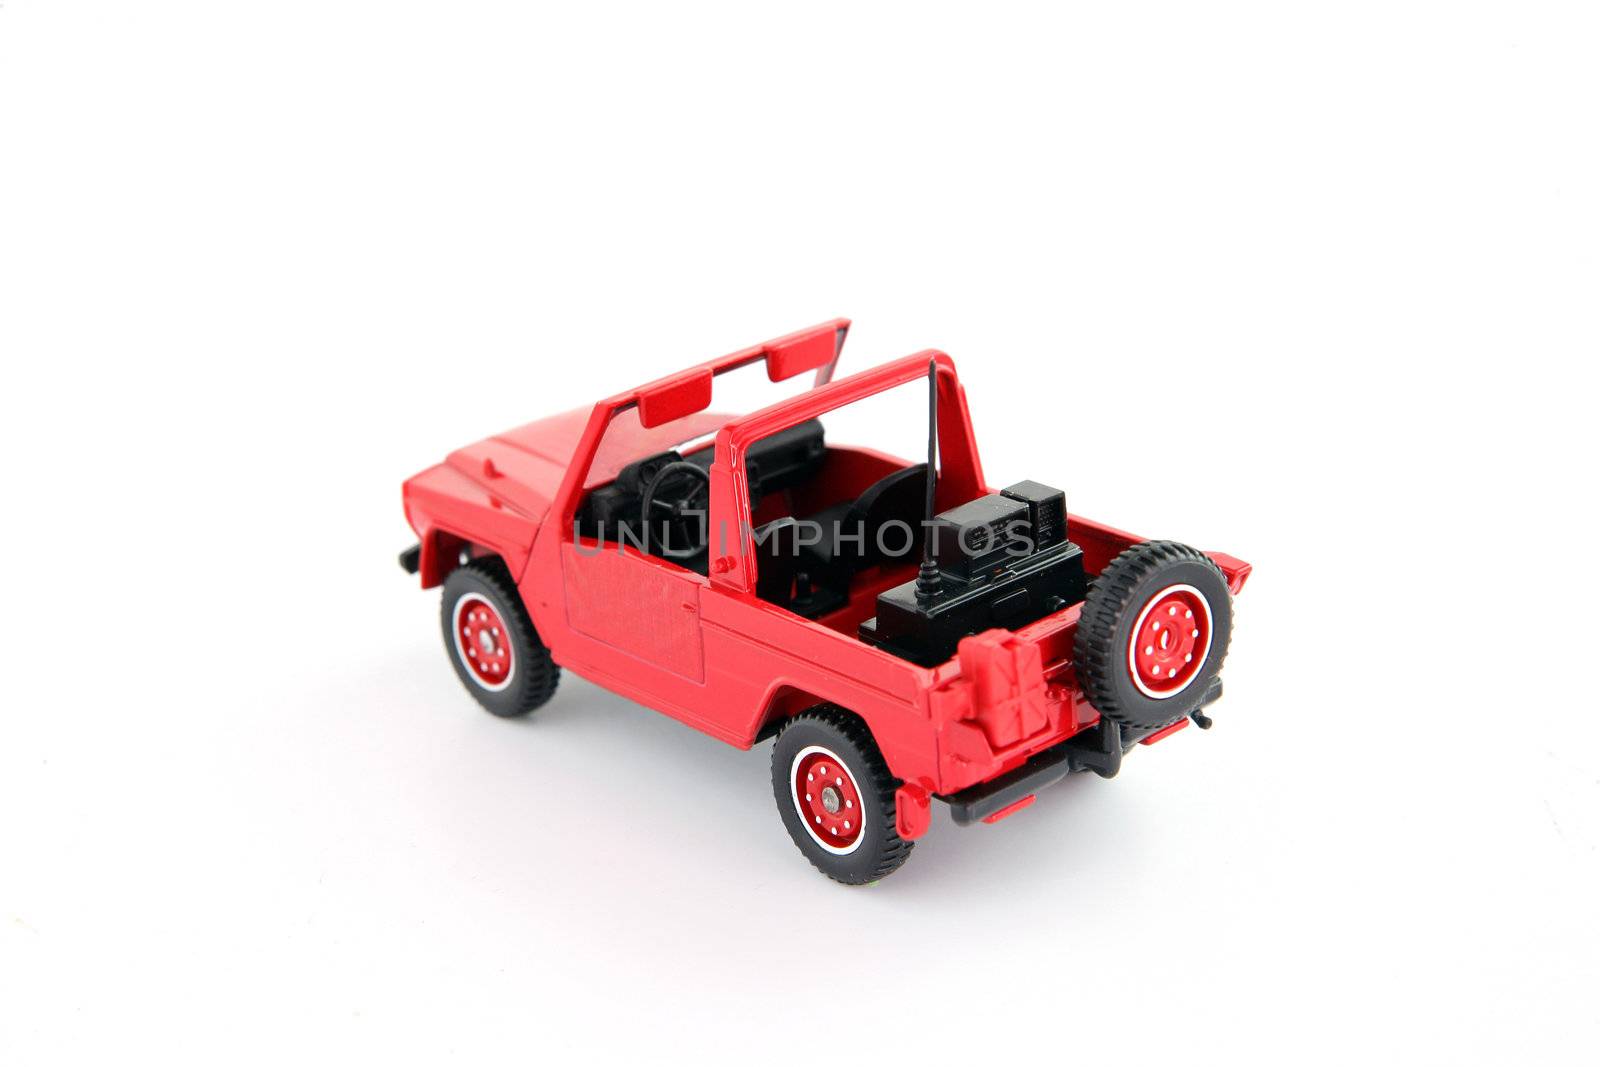 Scale model of red of road vehicle by phovoir